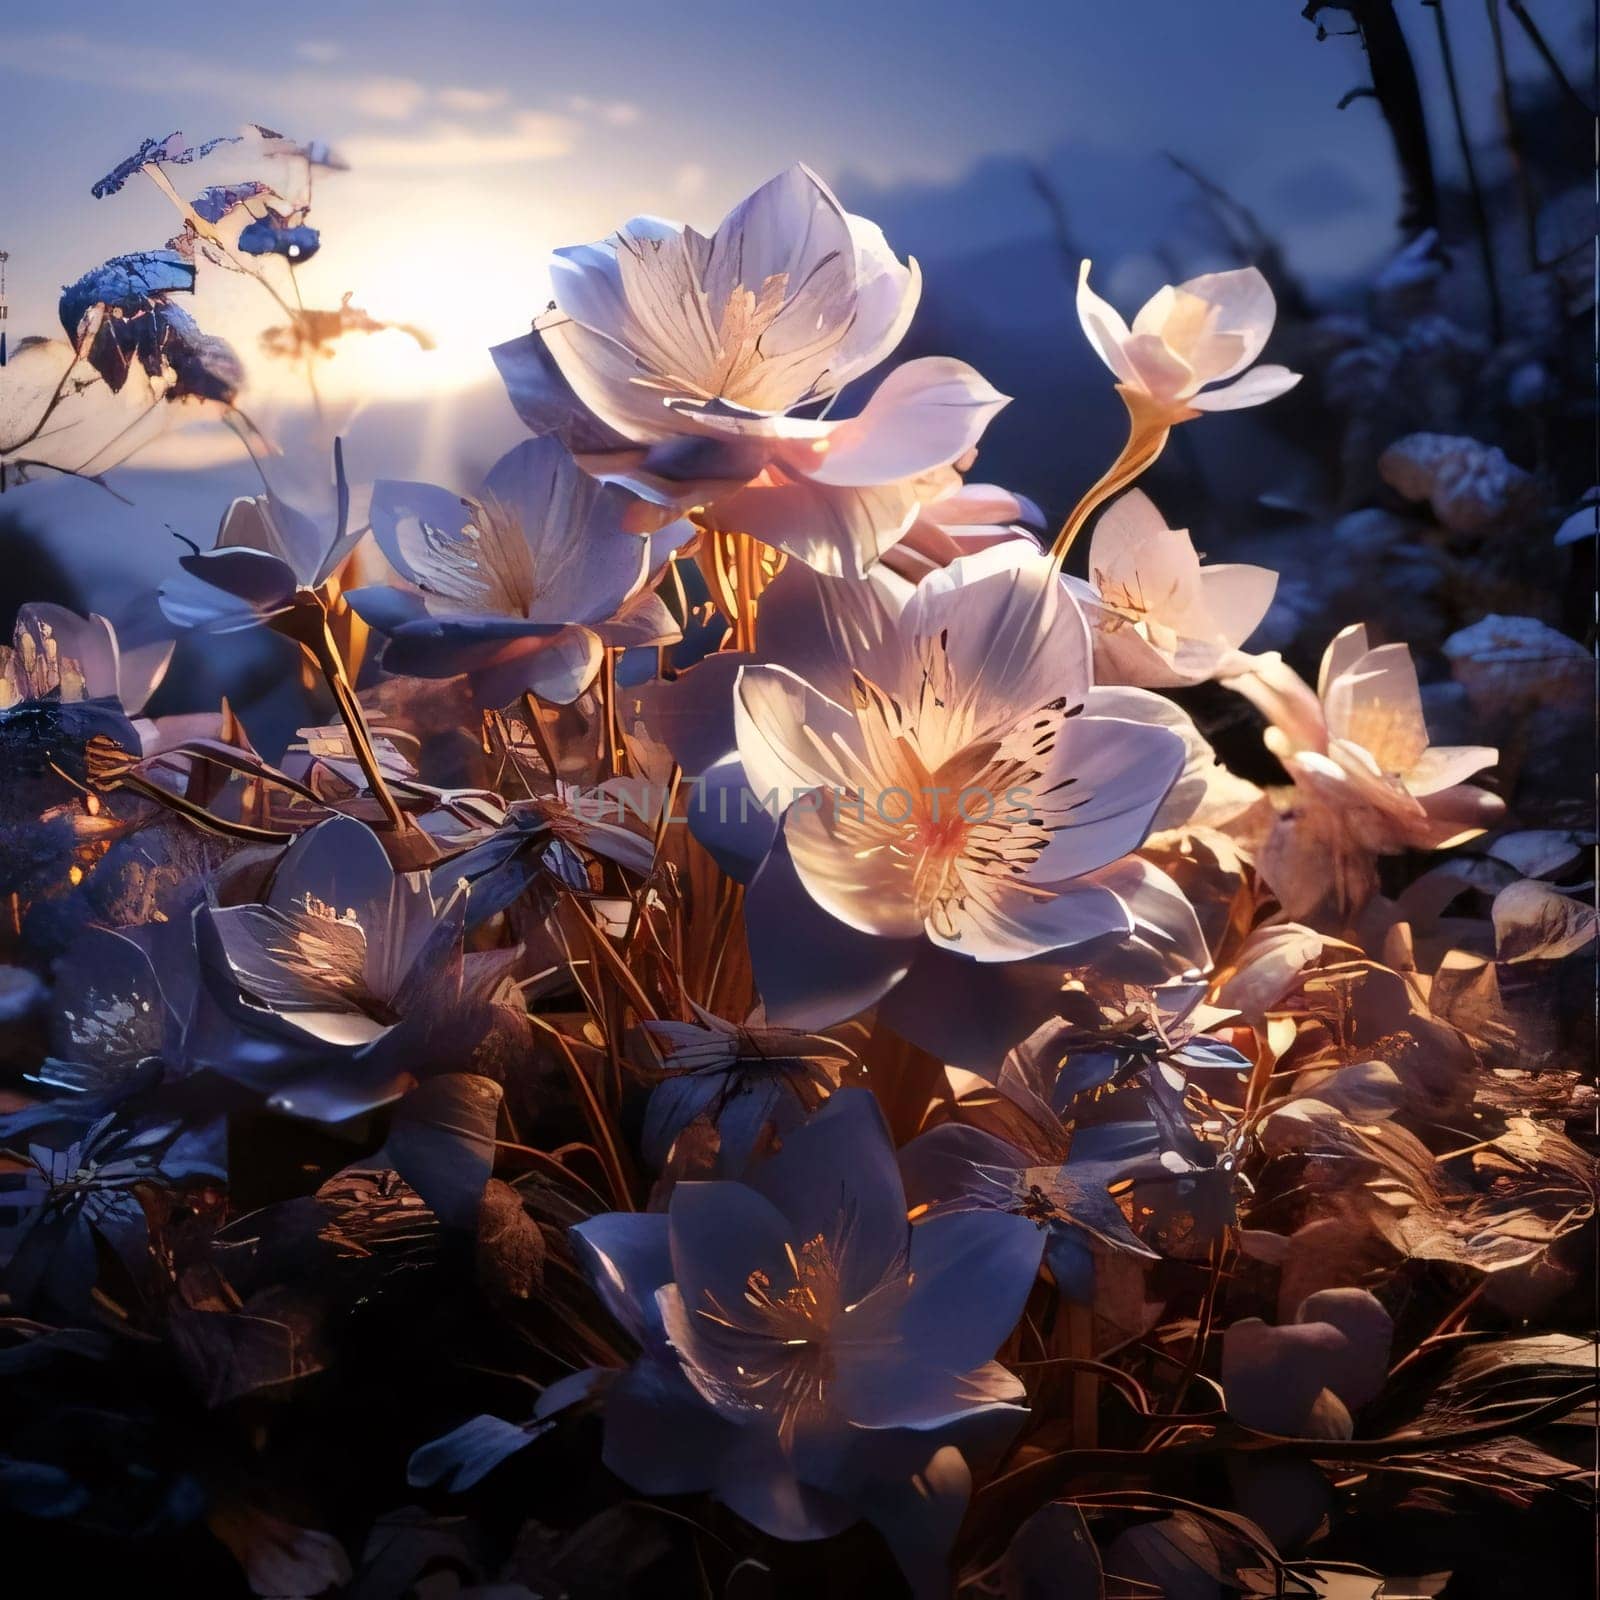 White flowers in the sunset rays, dark background. Flowering flowers, a symbol of spring, new life. by ThemesS